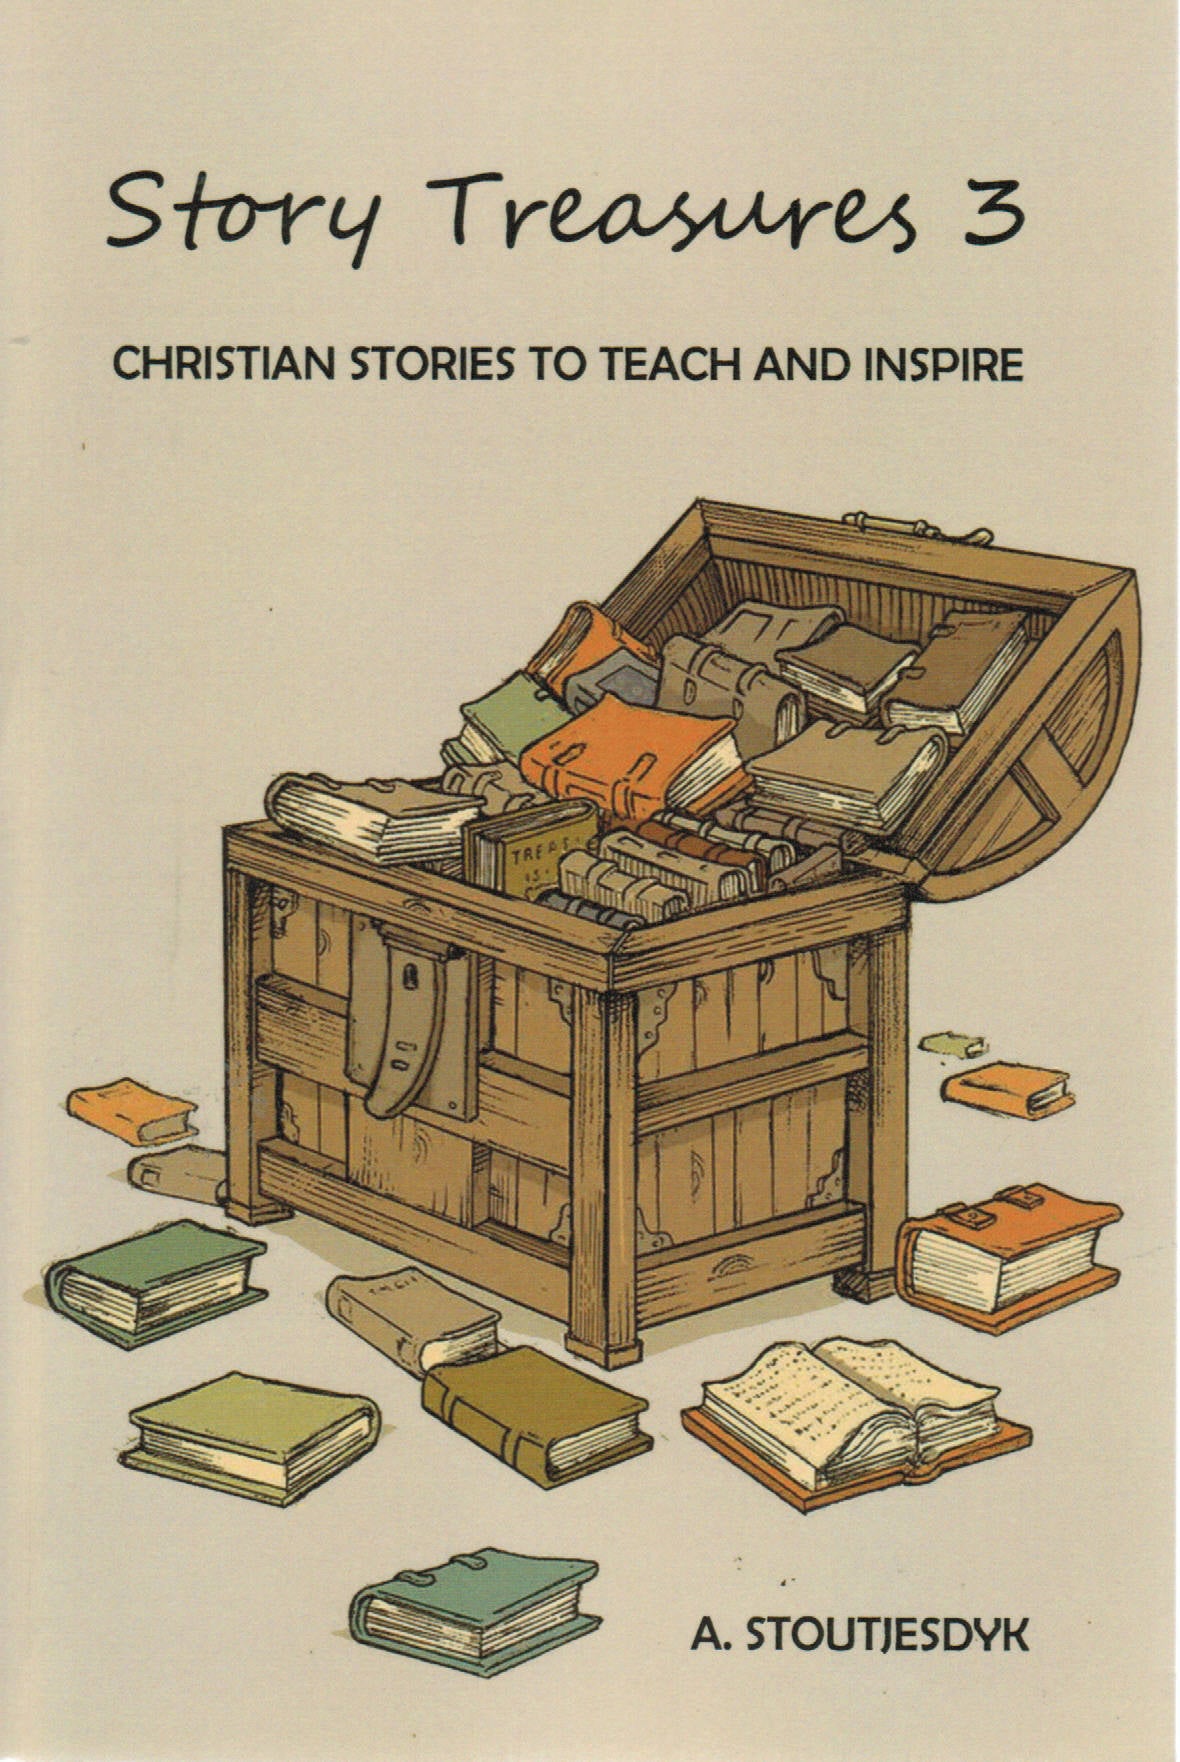 Story Treasures 3: Christian Stories to Teach and Inspire